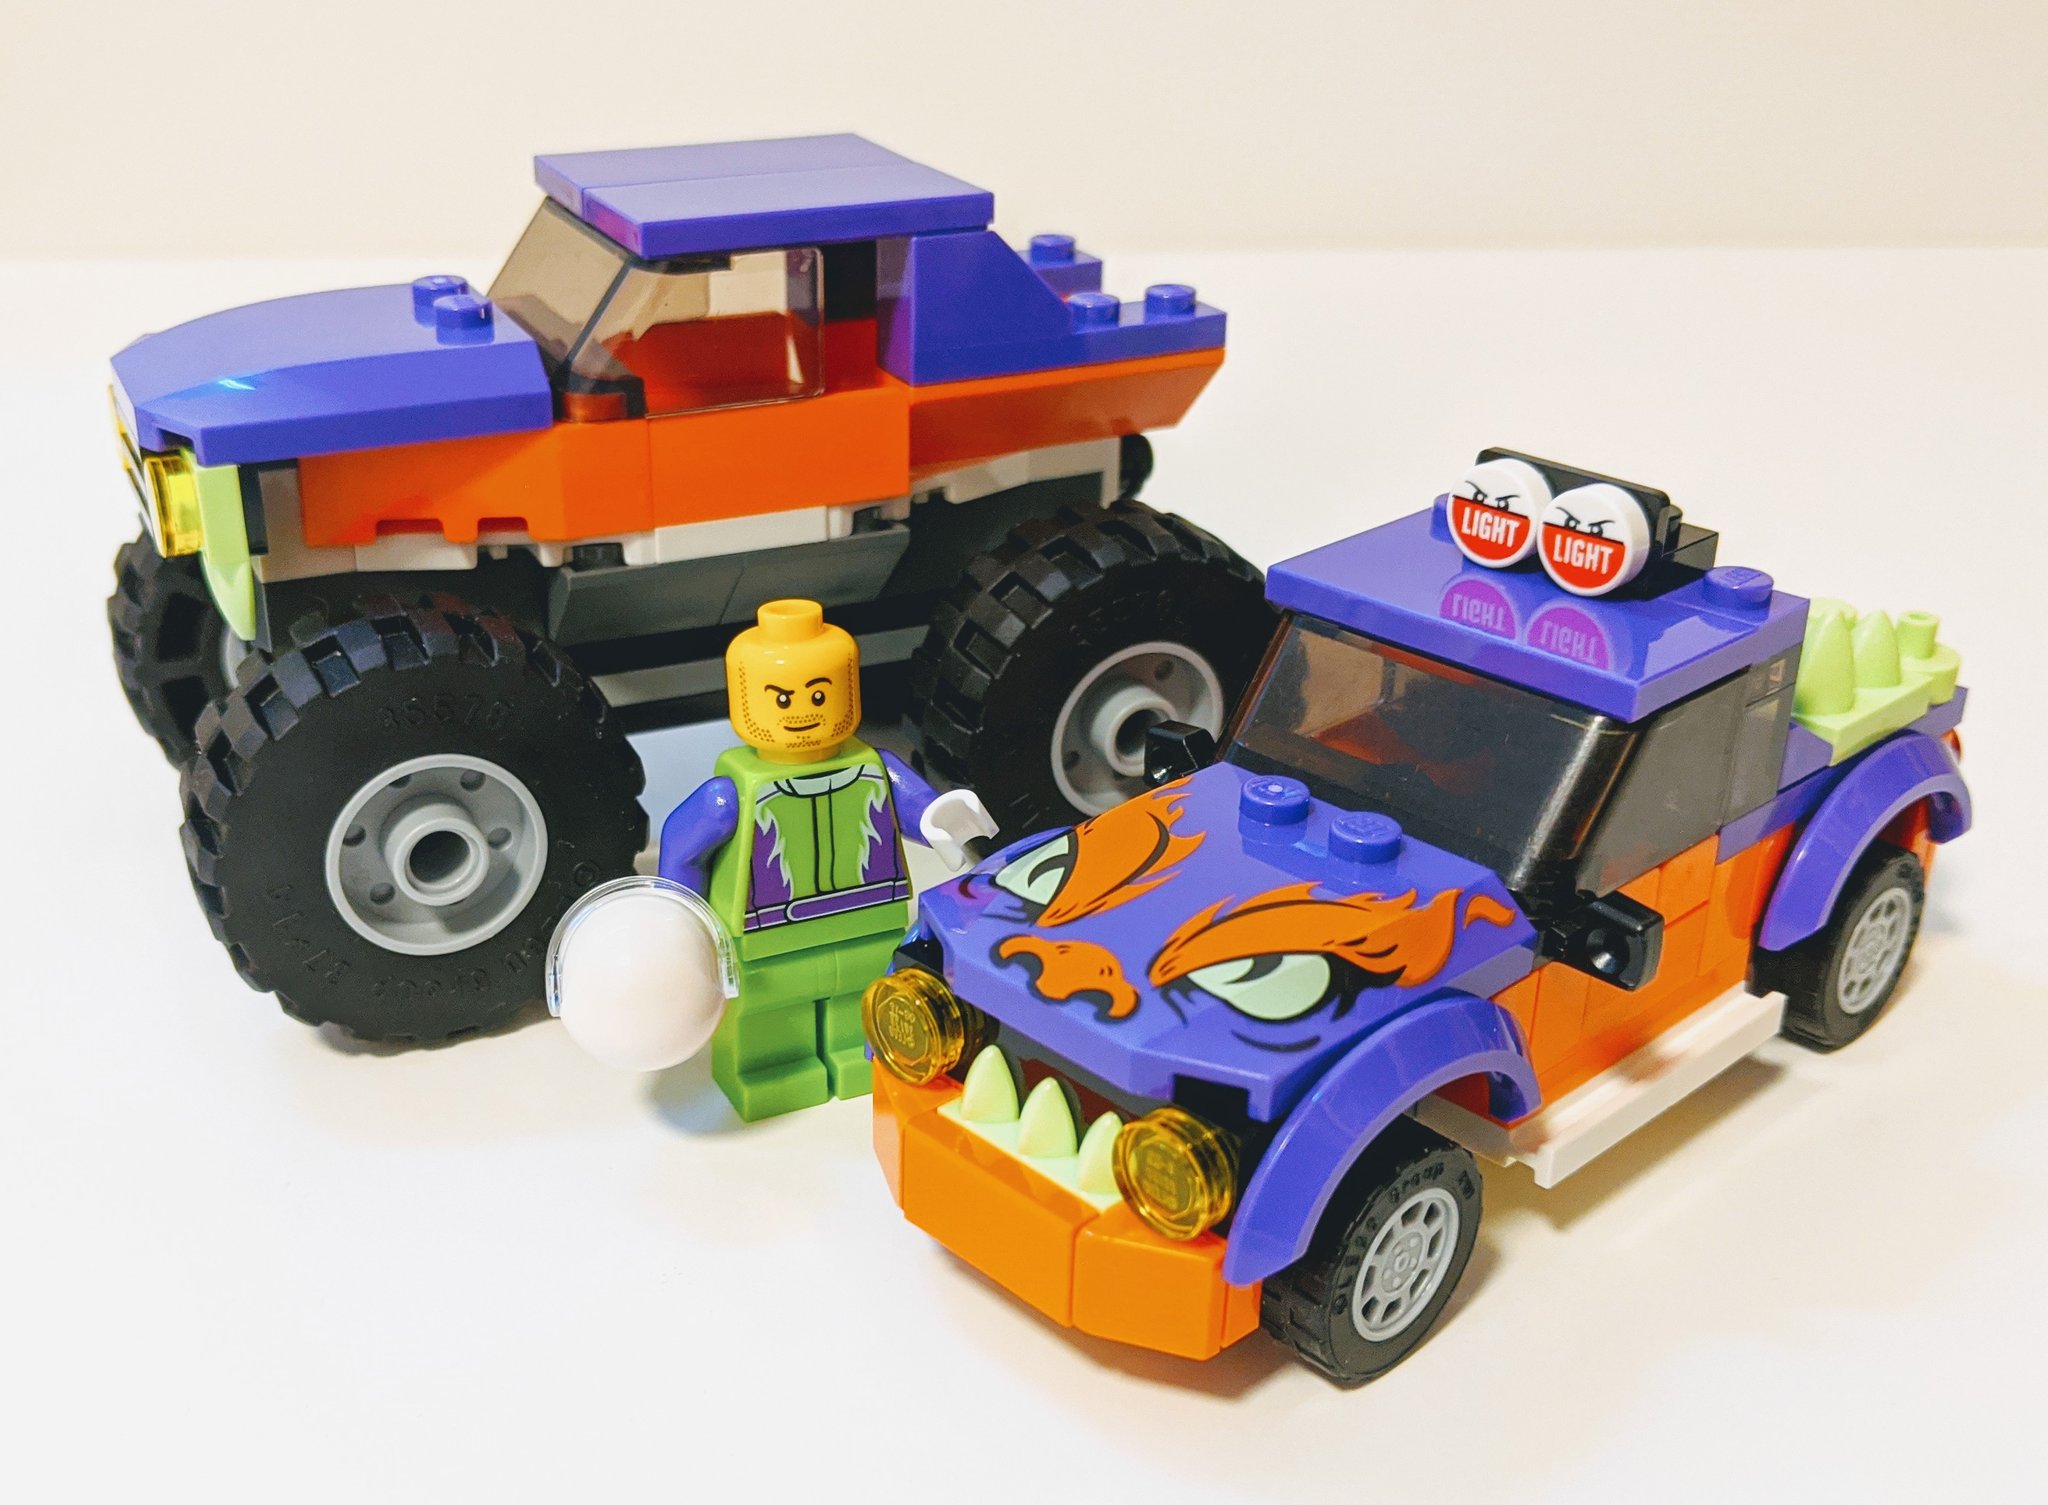 Øde berømmelse Ødelæggelse Craig Perrin on Twitter: "Re-imagined the 60251 Monster Truck into a street  legal custom ute, really happy with how this one turned out #LEGO #City  #car #MOC https://t.co/Q2Ok21QIRn" / Twitter